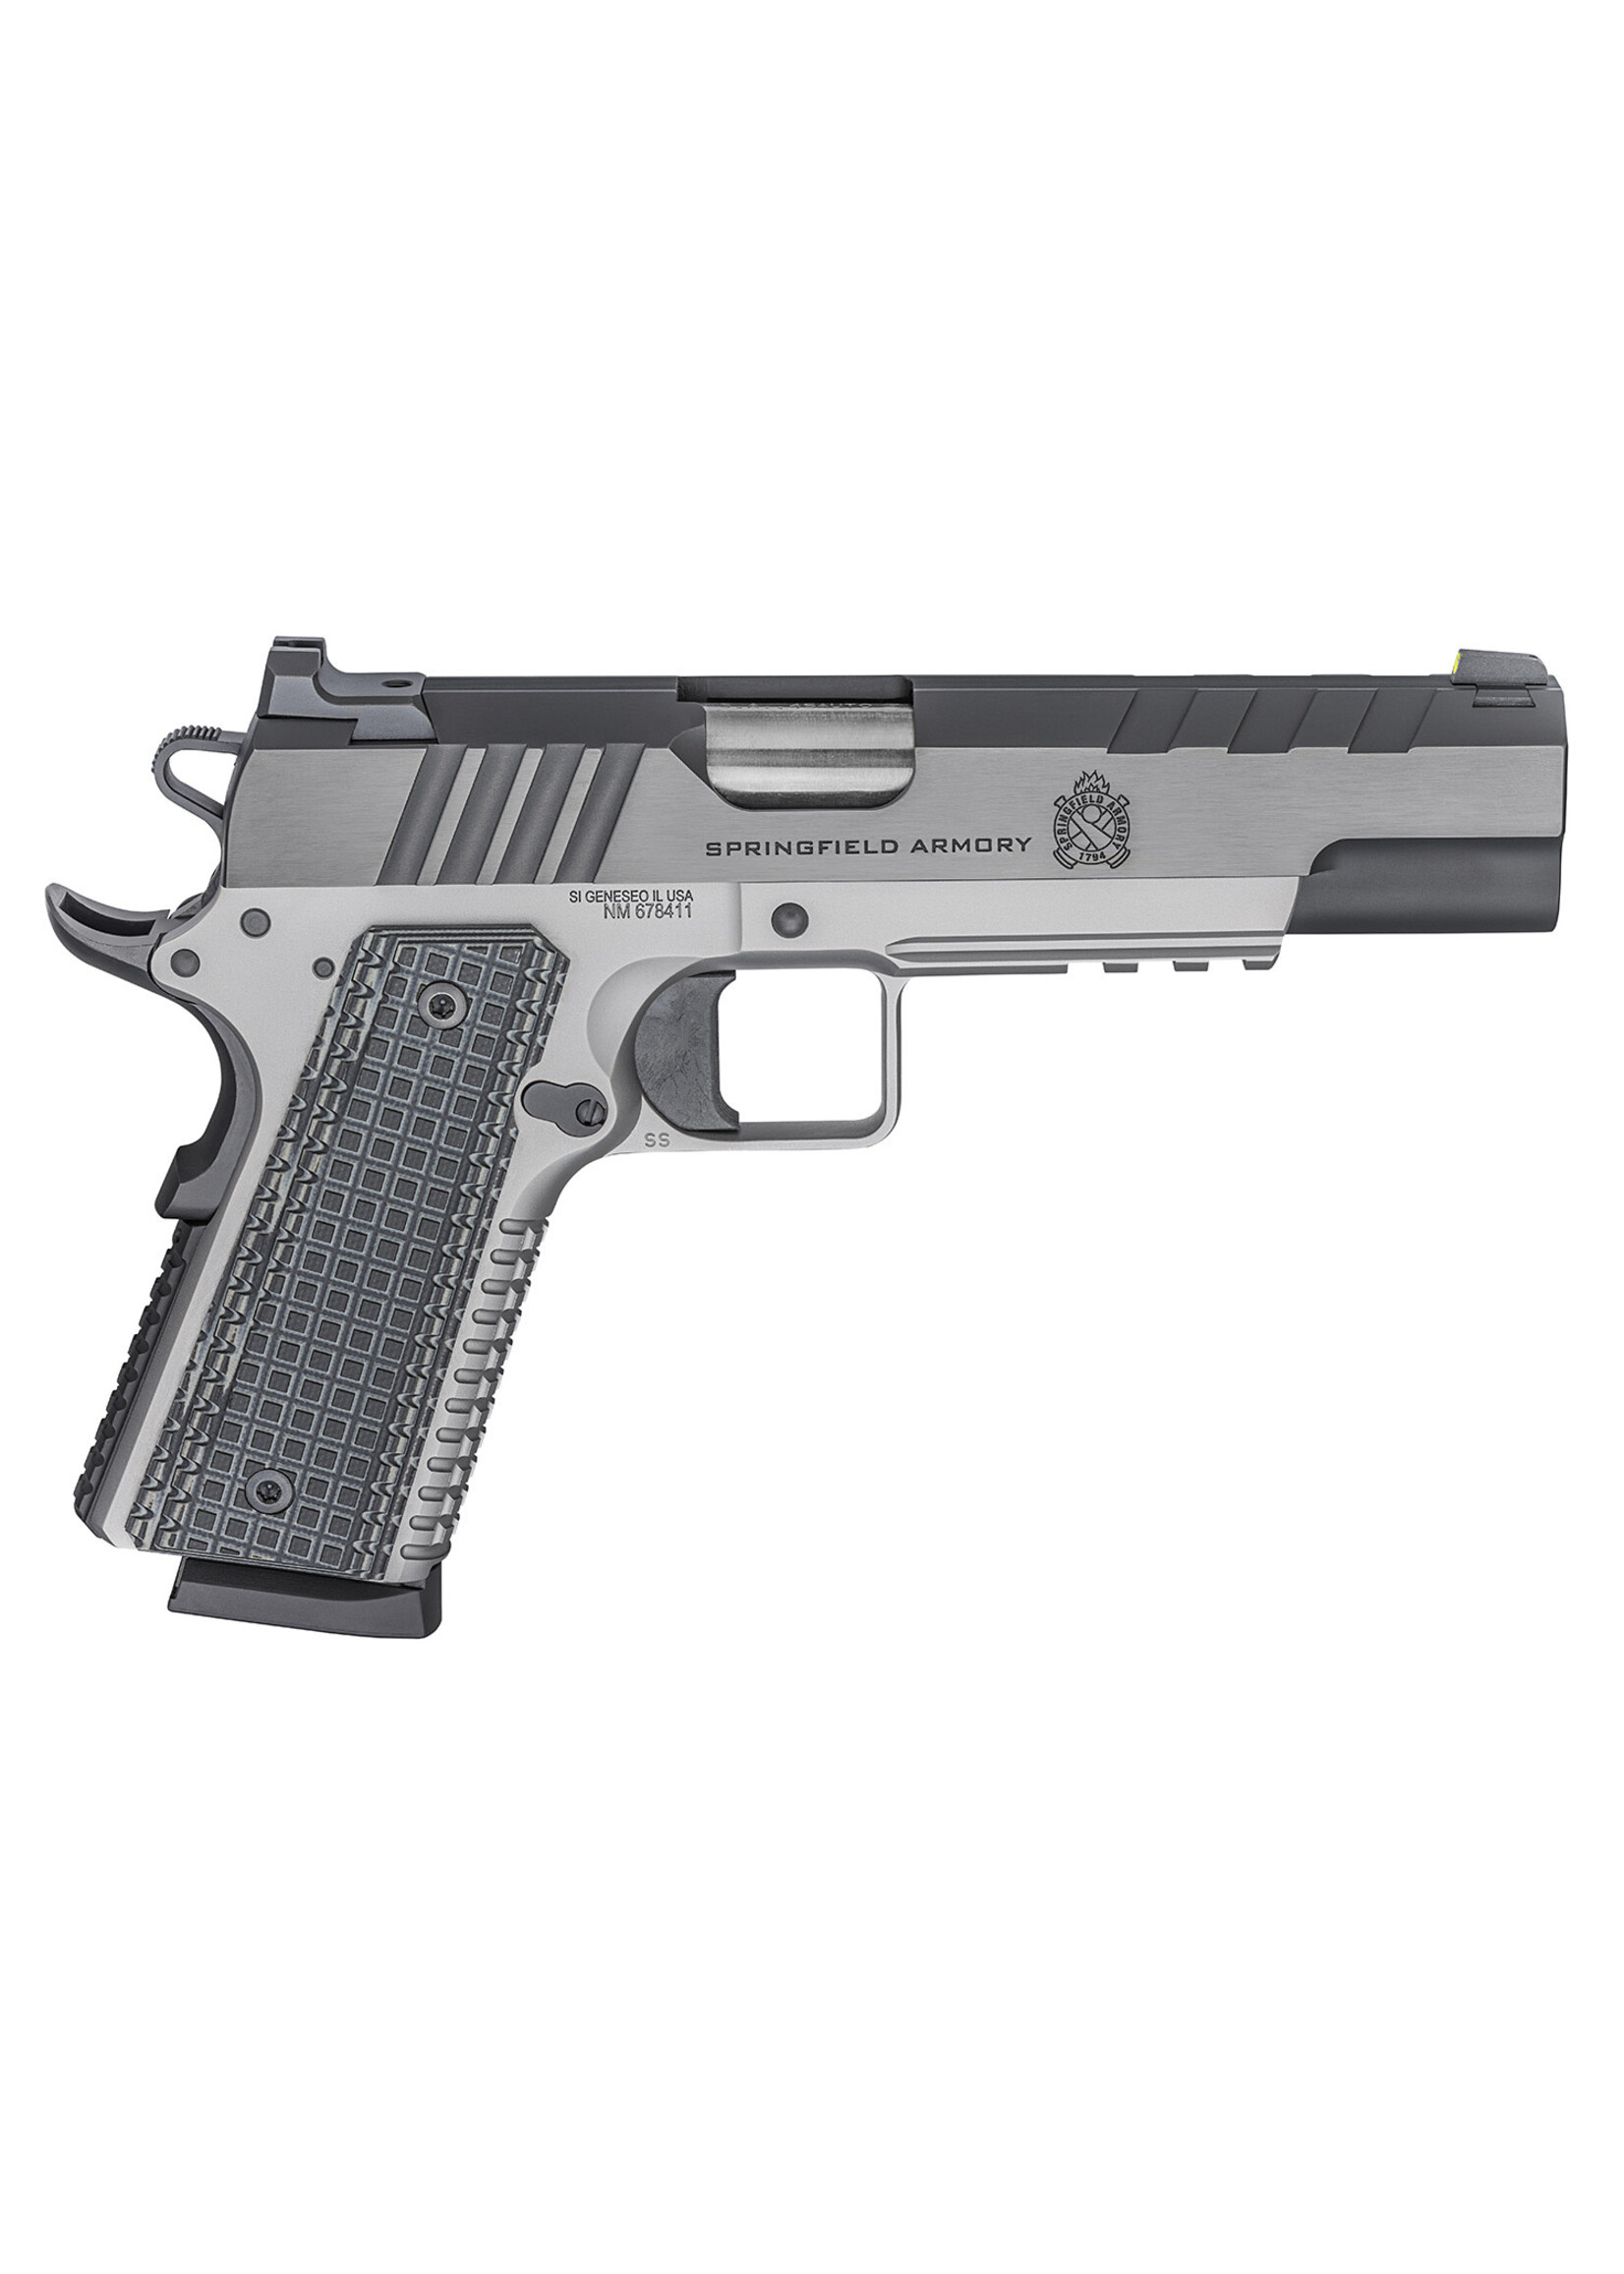 Springfield Armory Springfield Armory PX9220L 1911 Emissary 45 ACP Caliber with 5" Barrel, 8+1 Capacity, Stainless Steel Finish Picatinny Rail/Beavertail Frame, Tri-Top Cut Blued Carbon Steel Slide & Black VZ Thin-Line G10 Grip